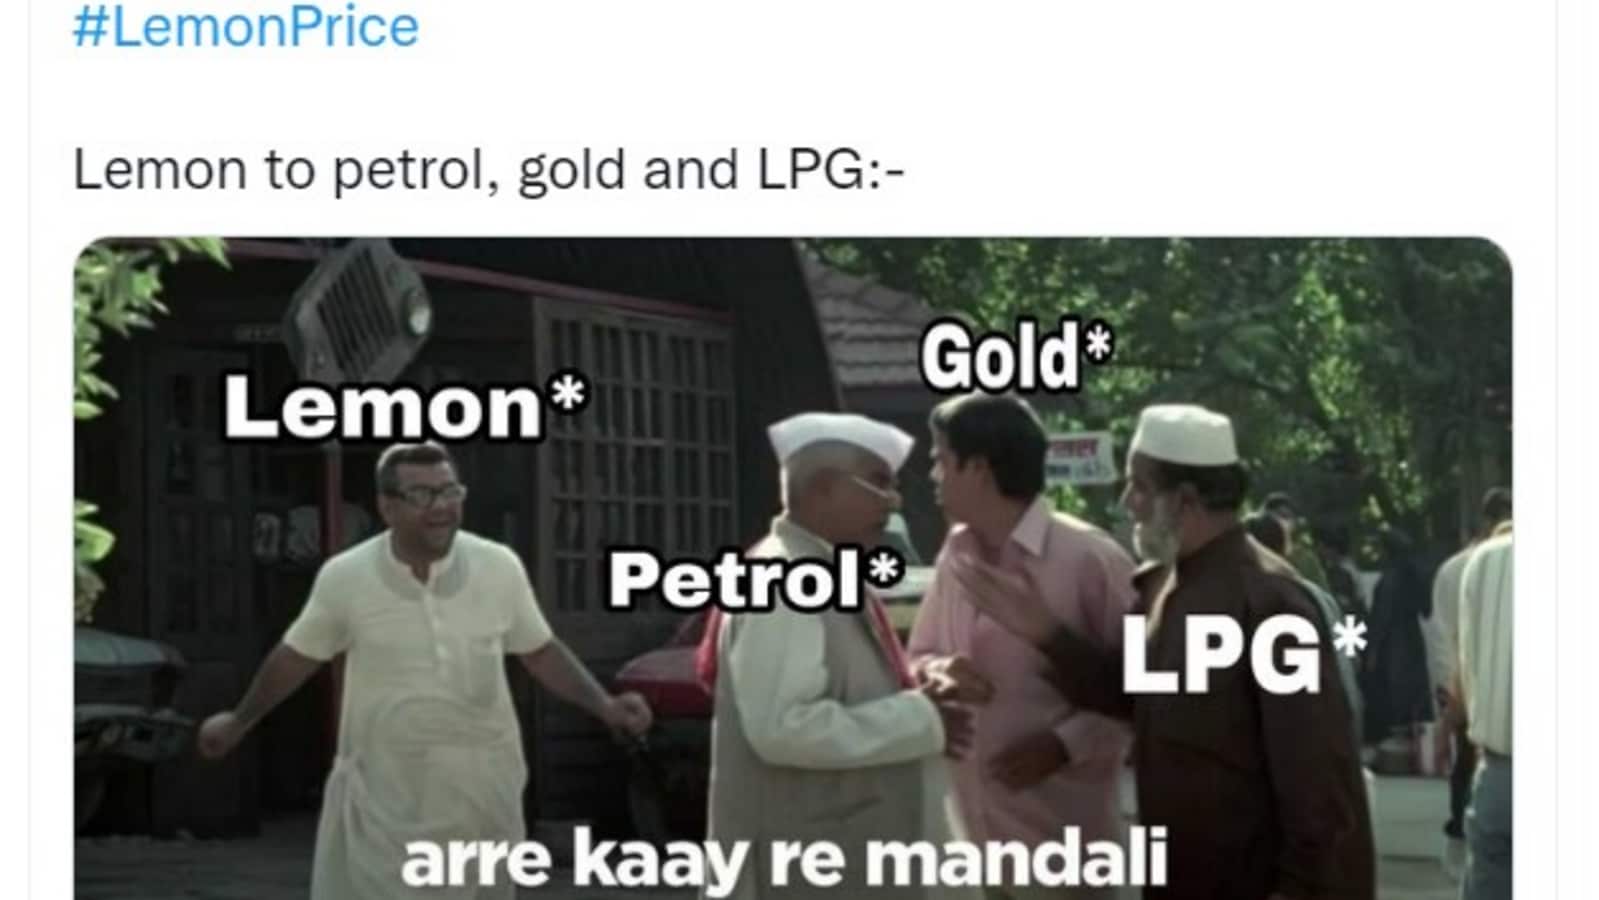 people squeeze out hilarious memes as lemon price soars across india | trending - hindustan times